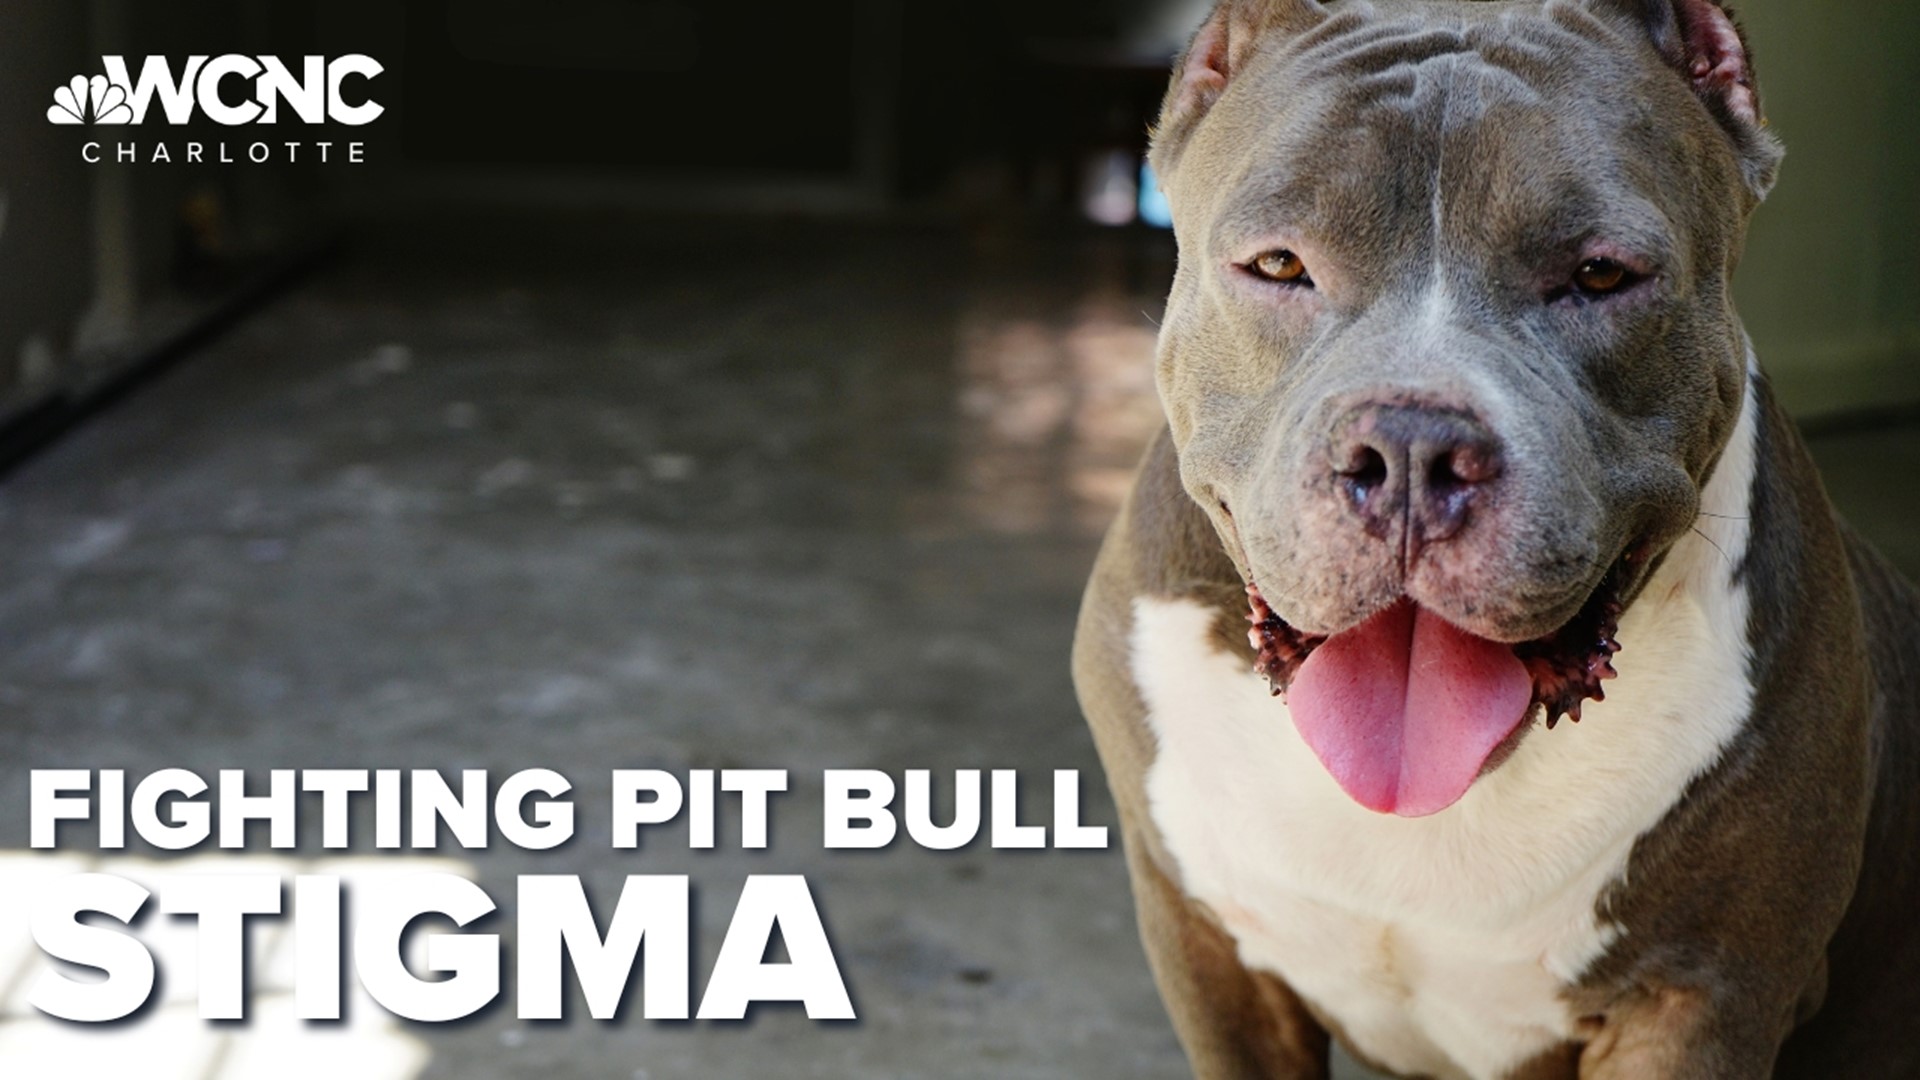 About half a million dollars is donated to help Stand For Animals provide free vet care to pit bull owners. It will help with overpopulation and the stigma.